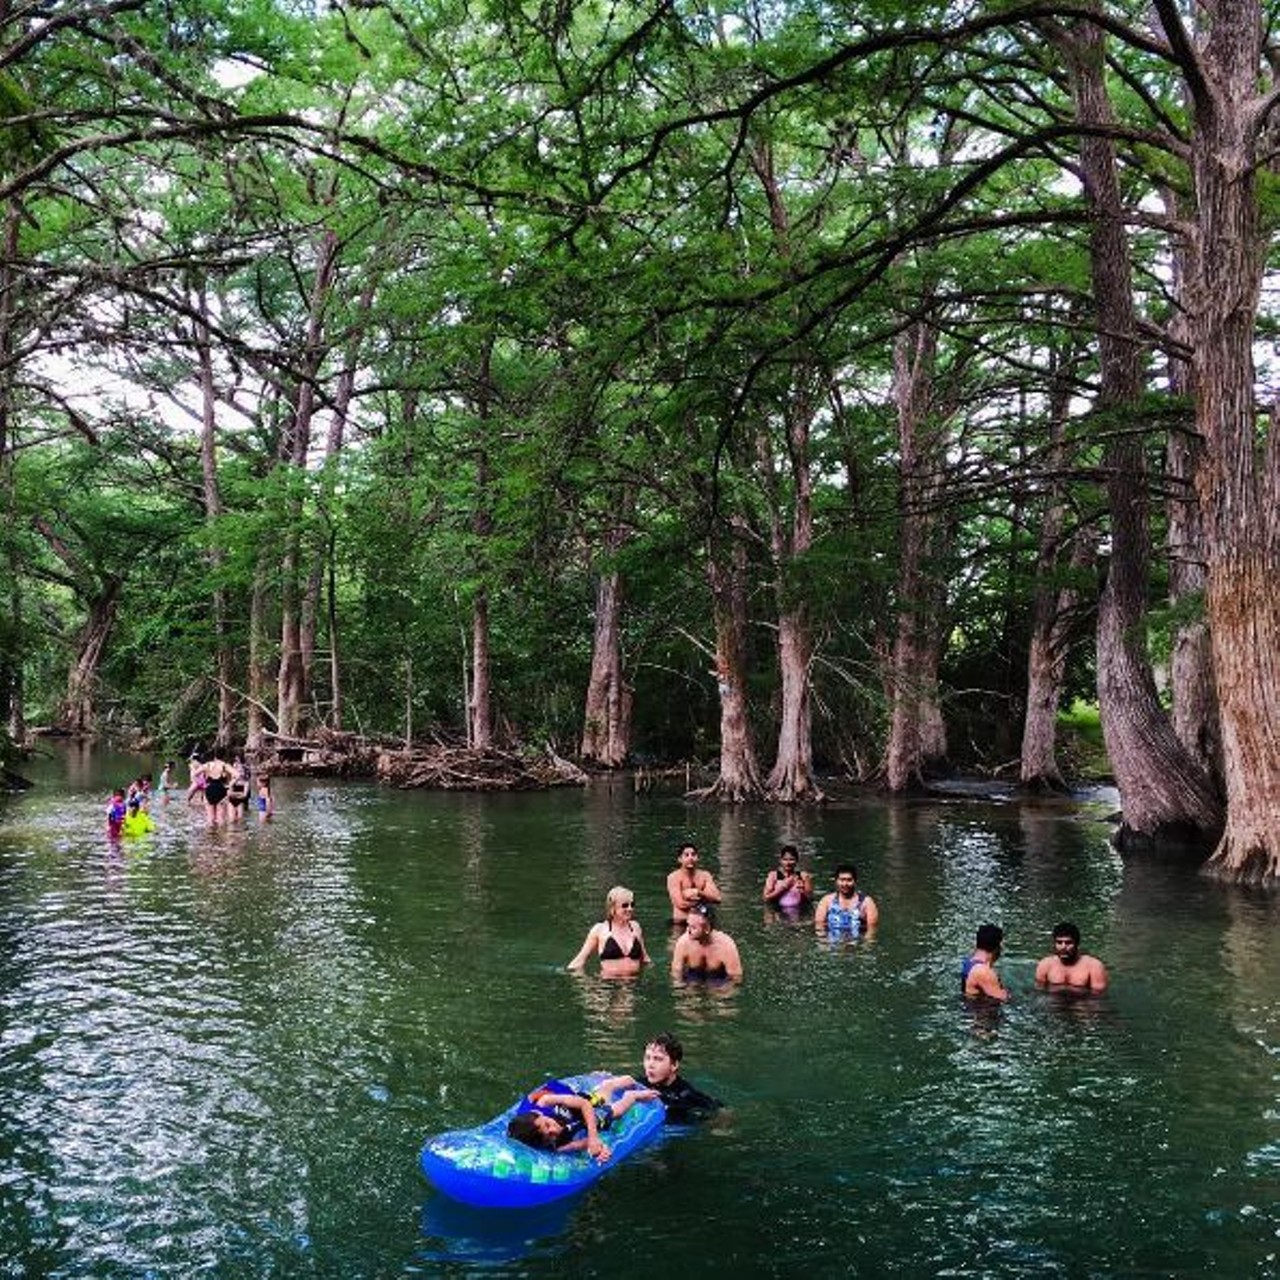 Blue Hole
100 Blue Hole Ln, Wimberley, (512) 660-9111, blueholeregionalpark.com
Save yourself from getting beaten by the Texas sun by jumping in these waters with plenty of shade from the trees.
Photo via Instagram, ipheek